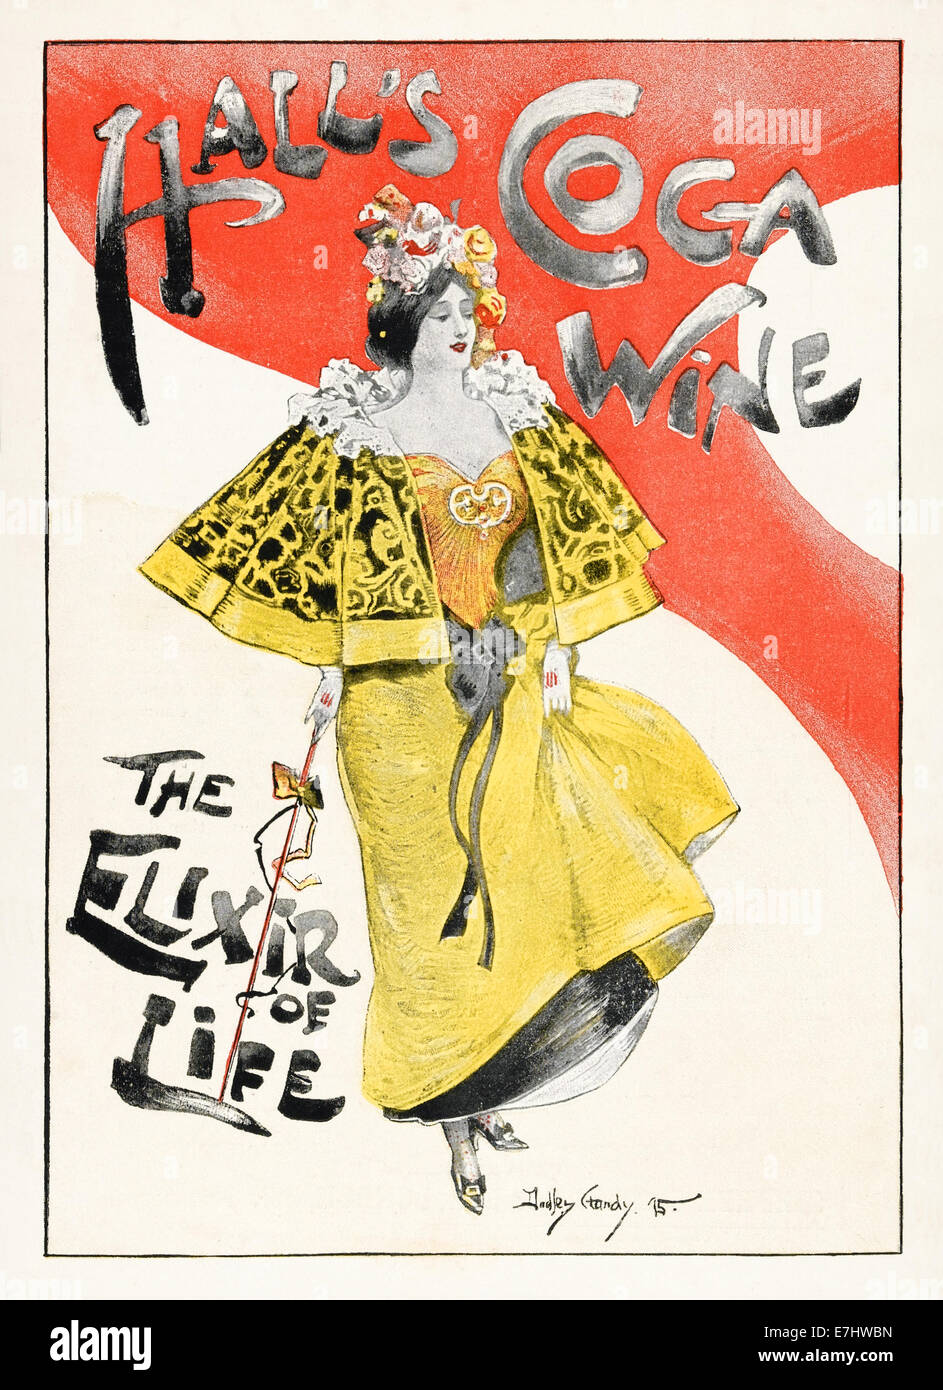 "Hall’s Coca Wine. The Elixir of Life." Print advertisement by Dudley Hardy See description for more information. Stock Photo